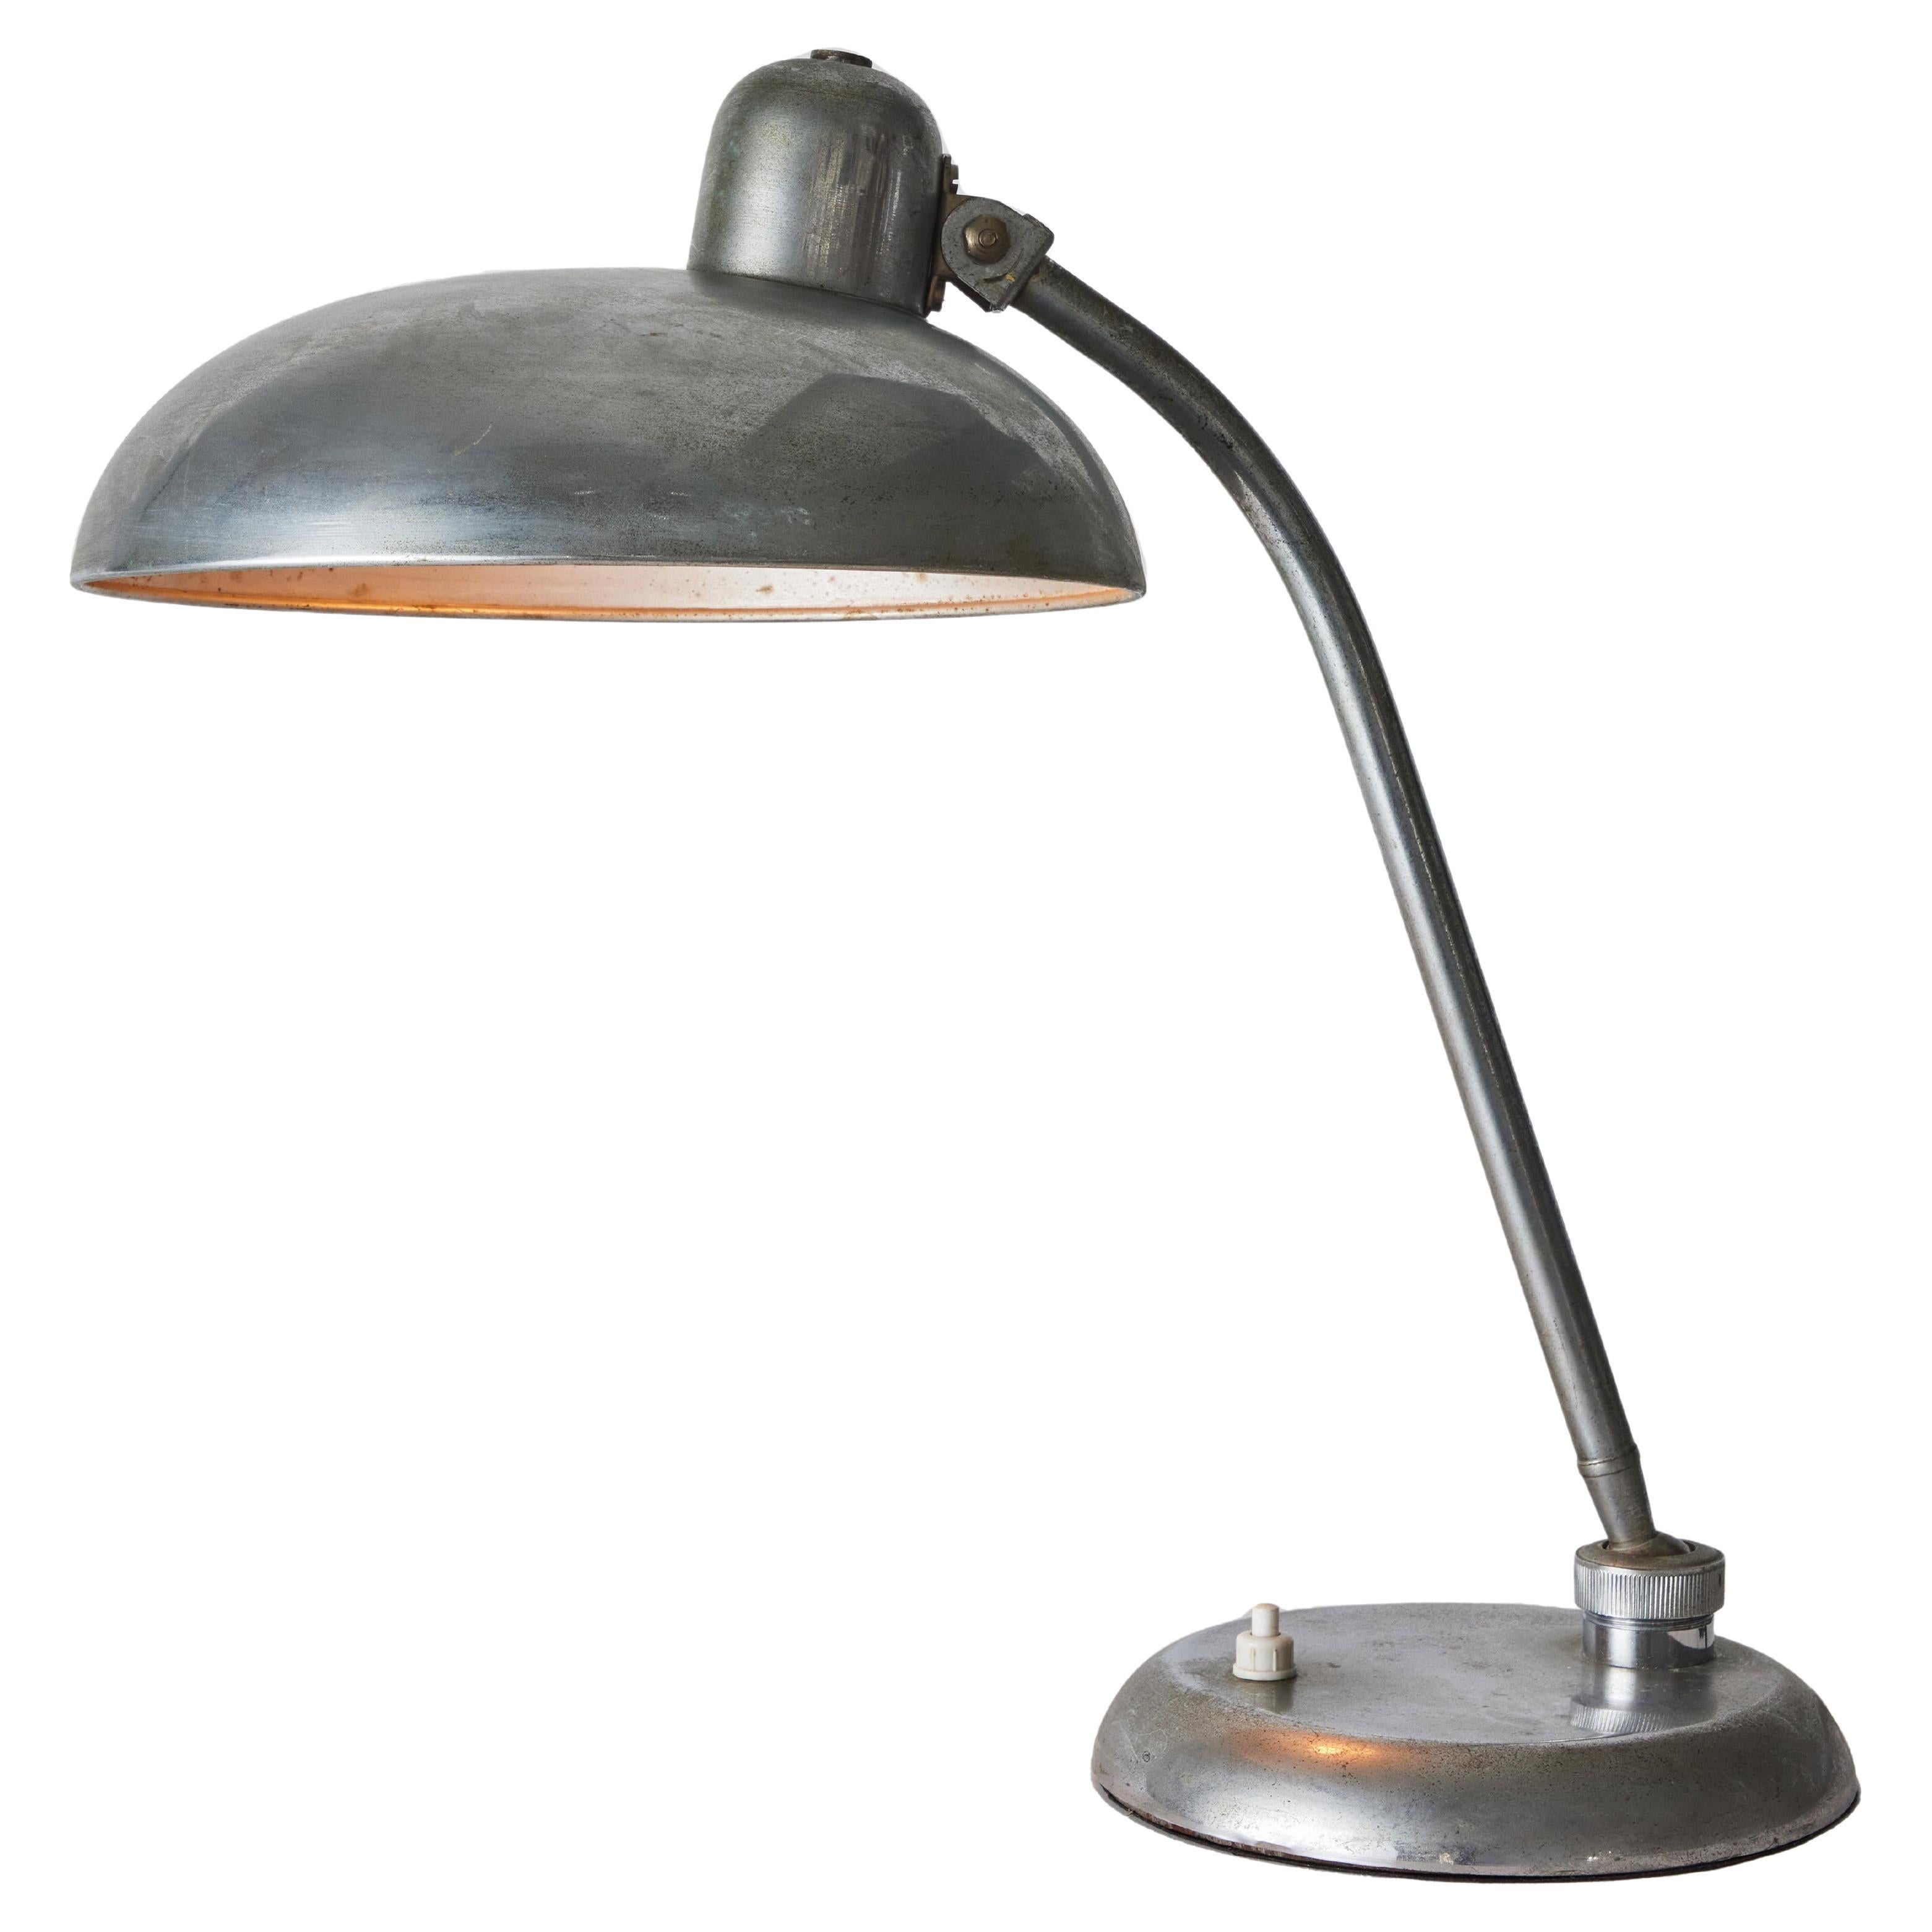 1940s Giovanni Michelucci Patinated Nickel Ministerial Table Lamp for Lariolux For Sale